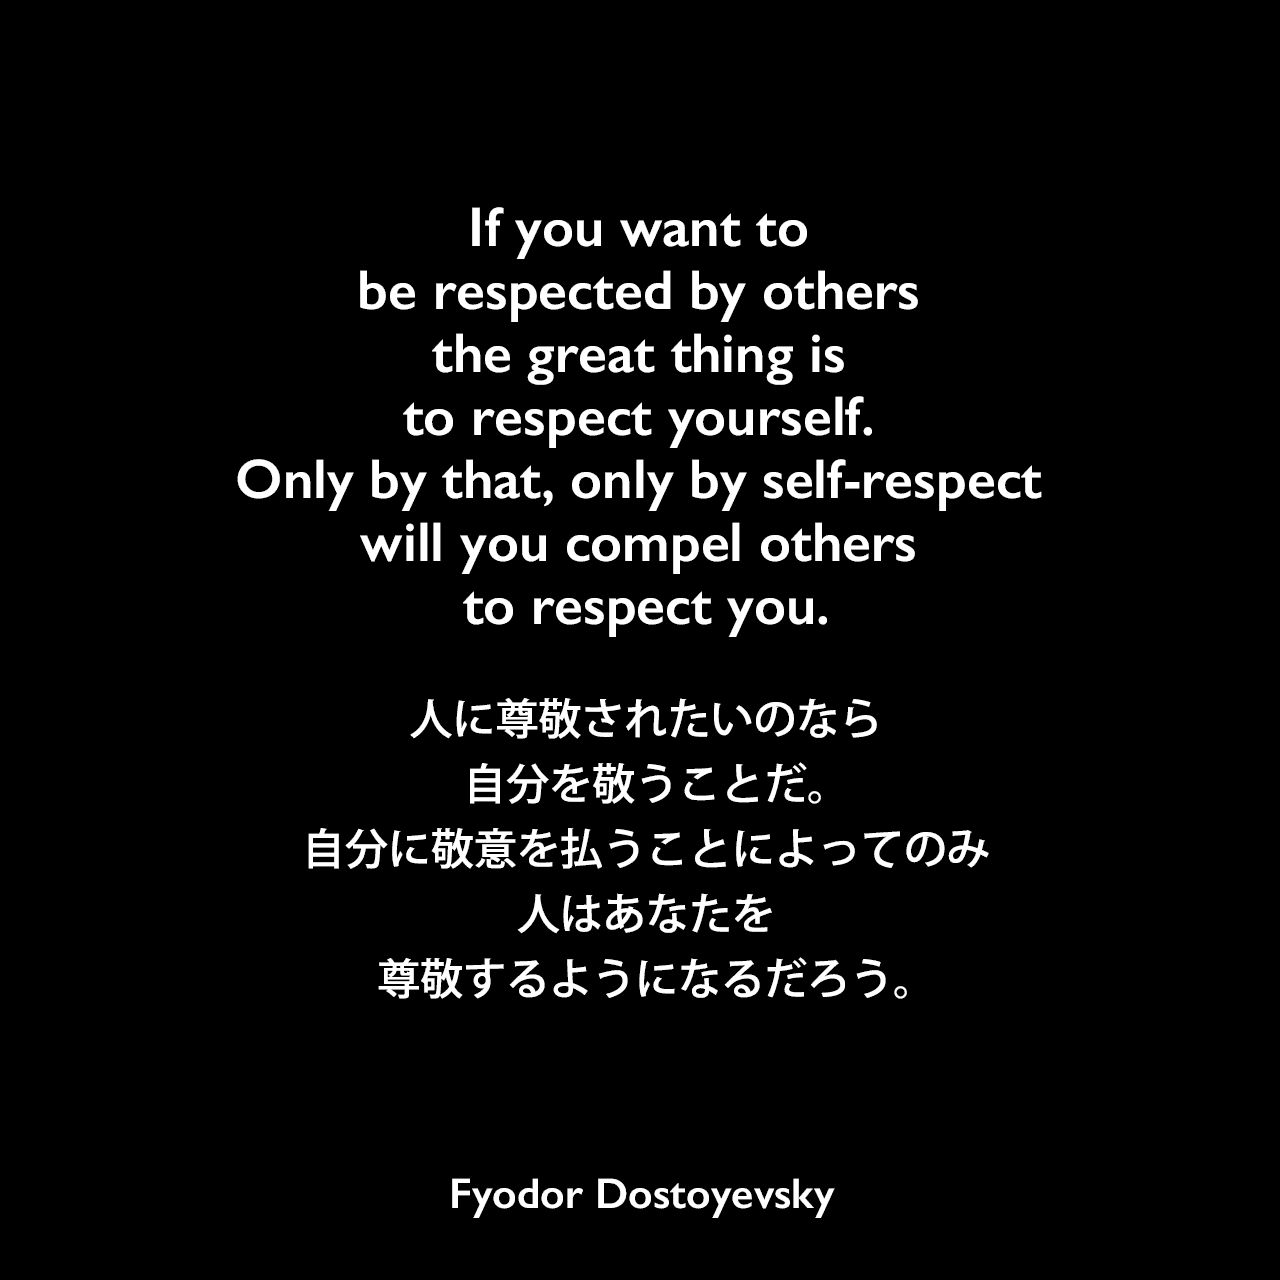 If you want to be respected by others the great thing is to respect yourself. Only by that, only by self-respect will you compel others to respect you.人に尊敬されたいのなら、自分を敬うことだ。自分に敬意を払うことによってのみ、人はあなたを尊敬するようになるだろう。